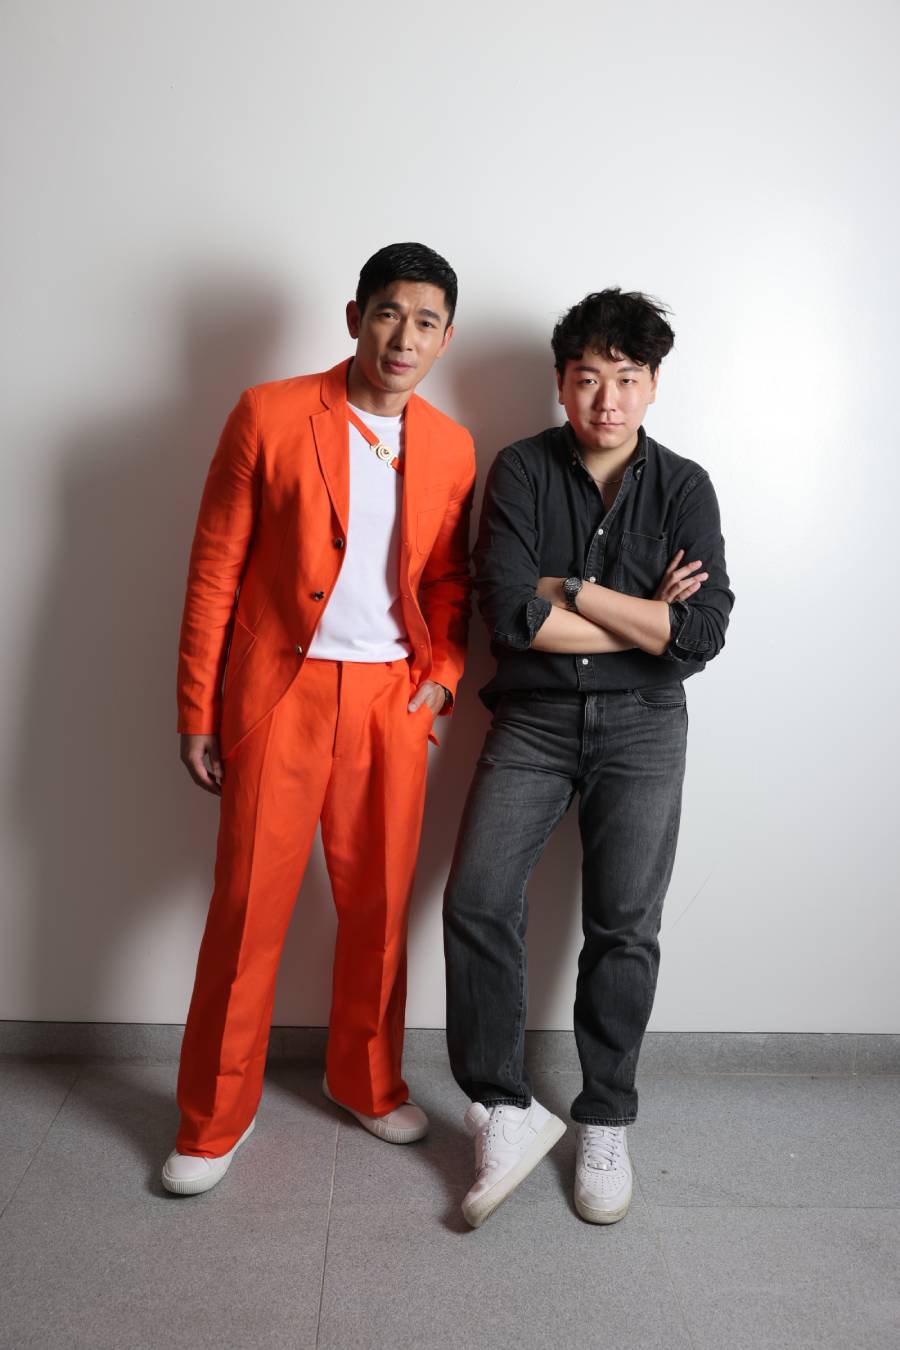 Elvin Ng with his stylist, Daryll Alexius Yeo